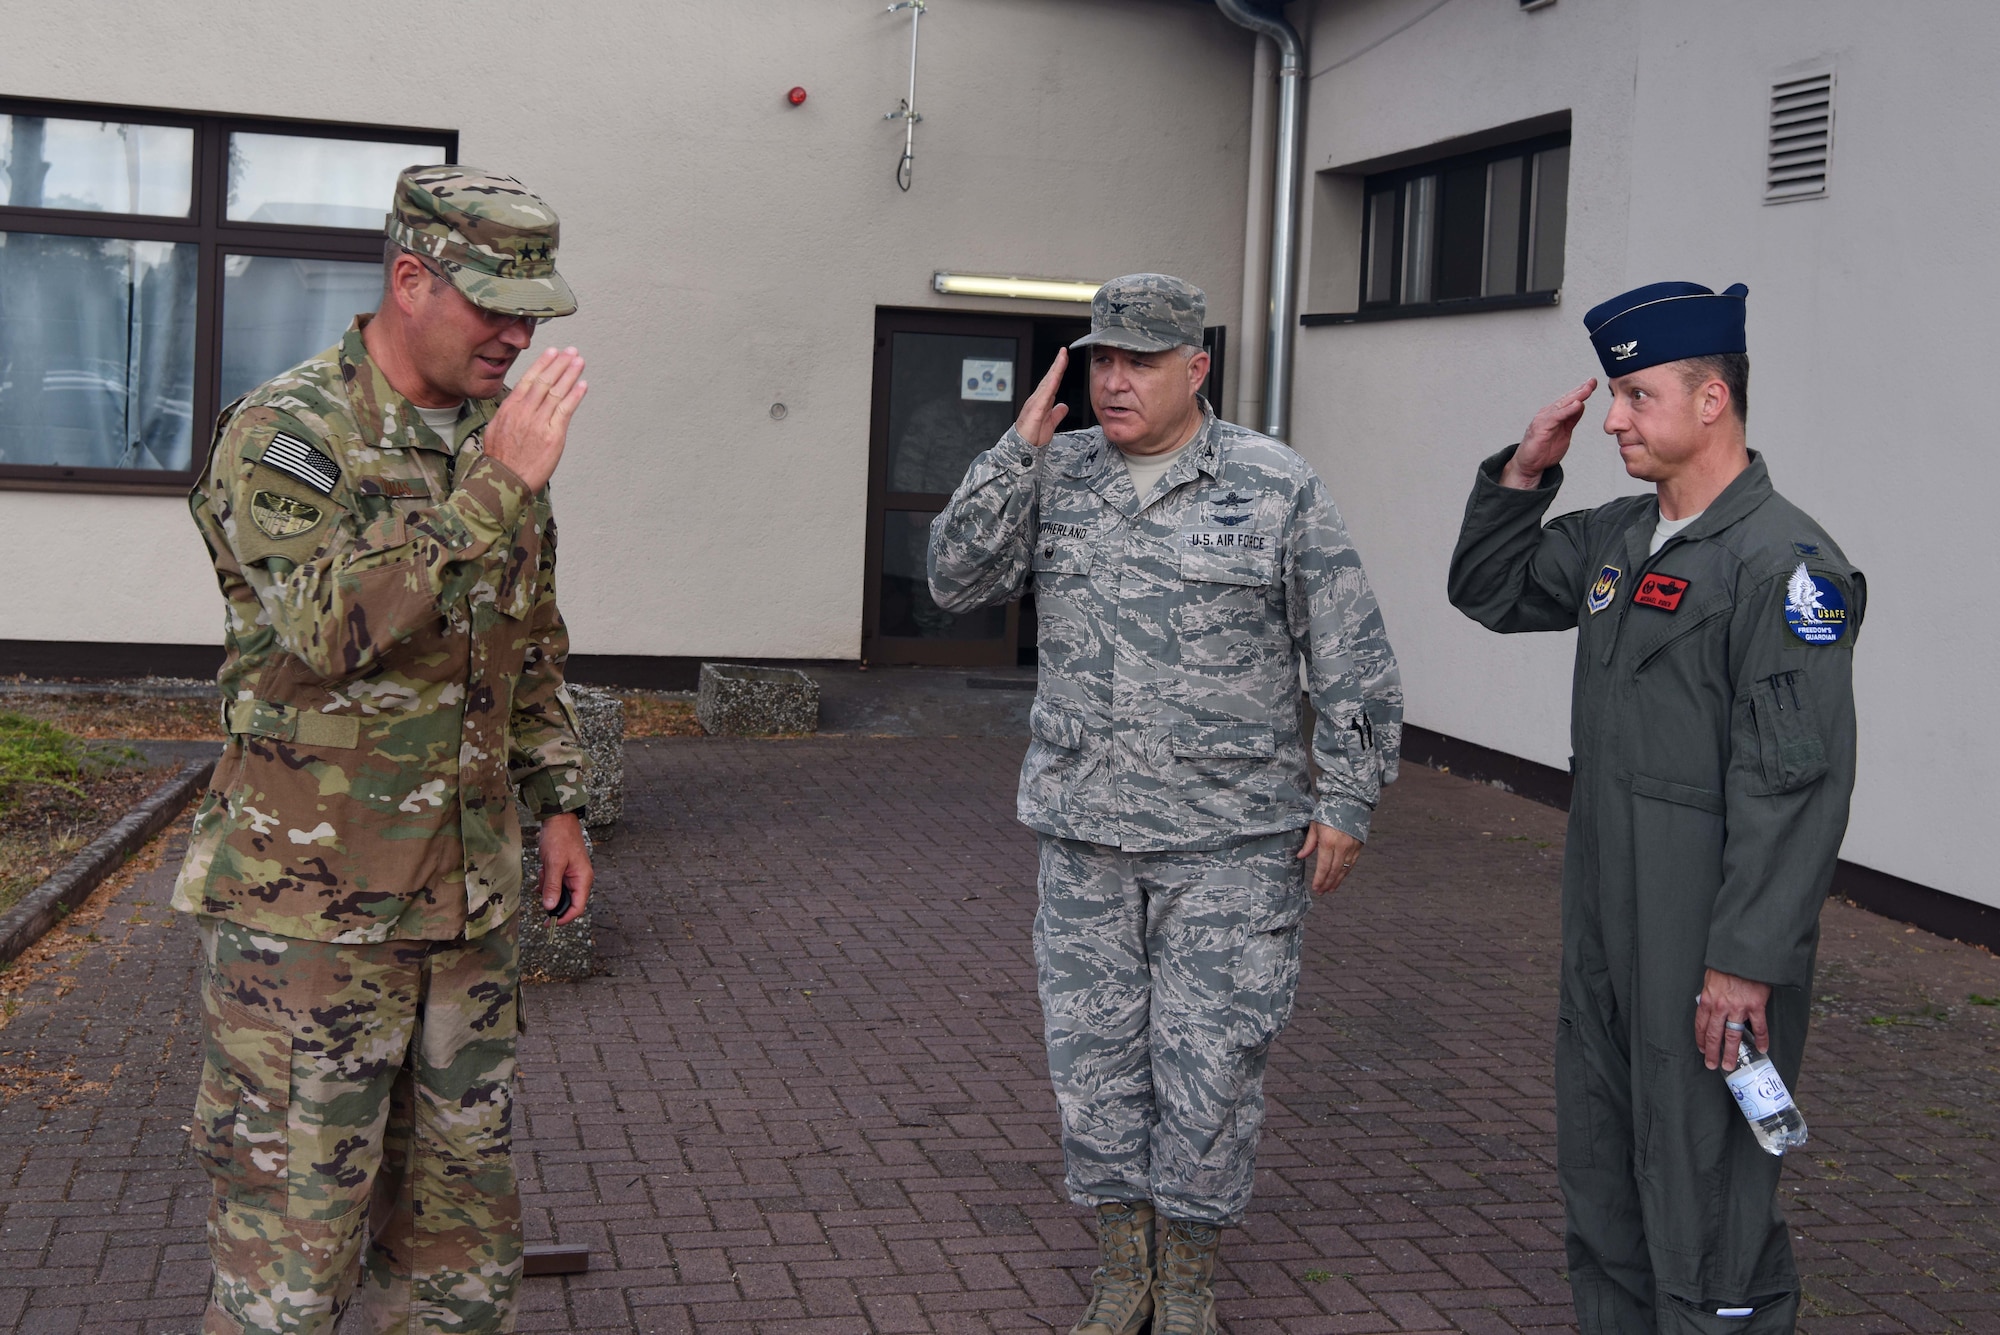 U.S. Air Force Col. Michael Rider (right), Warrior preparation center commander and Col. John Sutherland (center), U.S. Air Forces in Europe-Air Forces Africa A6 director salute U.S. Air Force Maj. Gen. Jon T. Thomas, (left) USAFE-AFAFRICA, director of operations strategic deterrence and nuclear integration as he departs Tacet Venari on Ramstein Air Base, Germany, July 12, 2018. “This exercise demonstrates how we can defend our networks and shows our capabilities at an installation and functional level,” said Thomas.